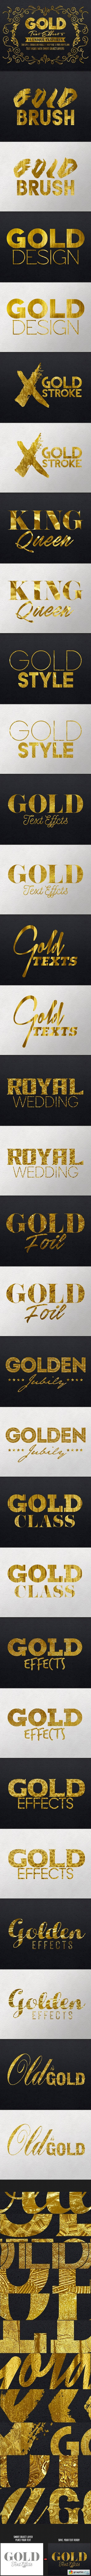 Gold Text Effects Gold